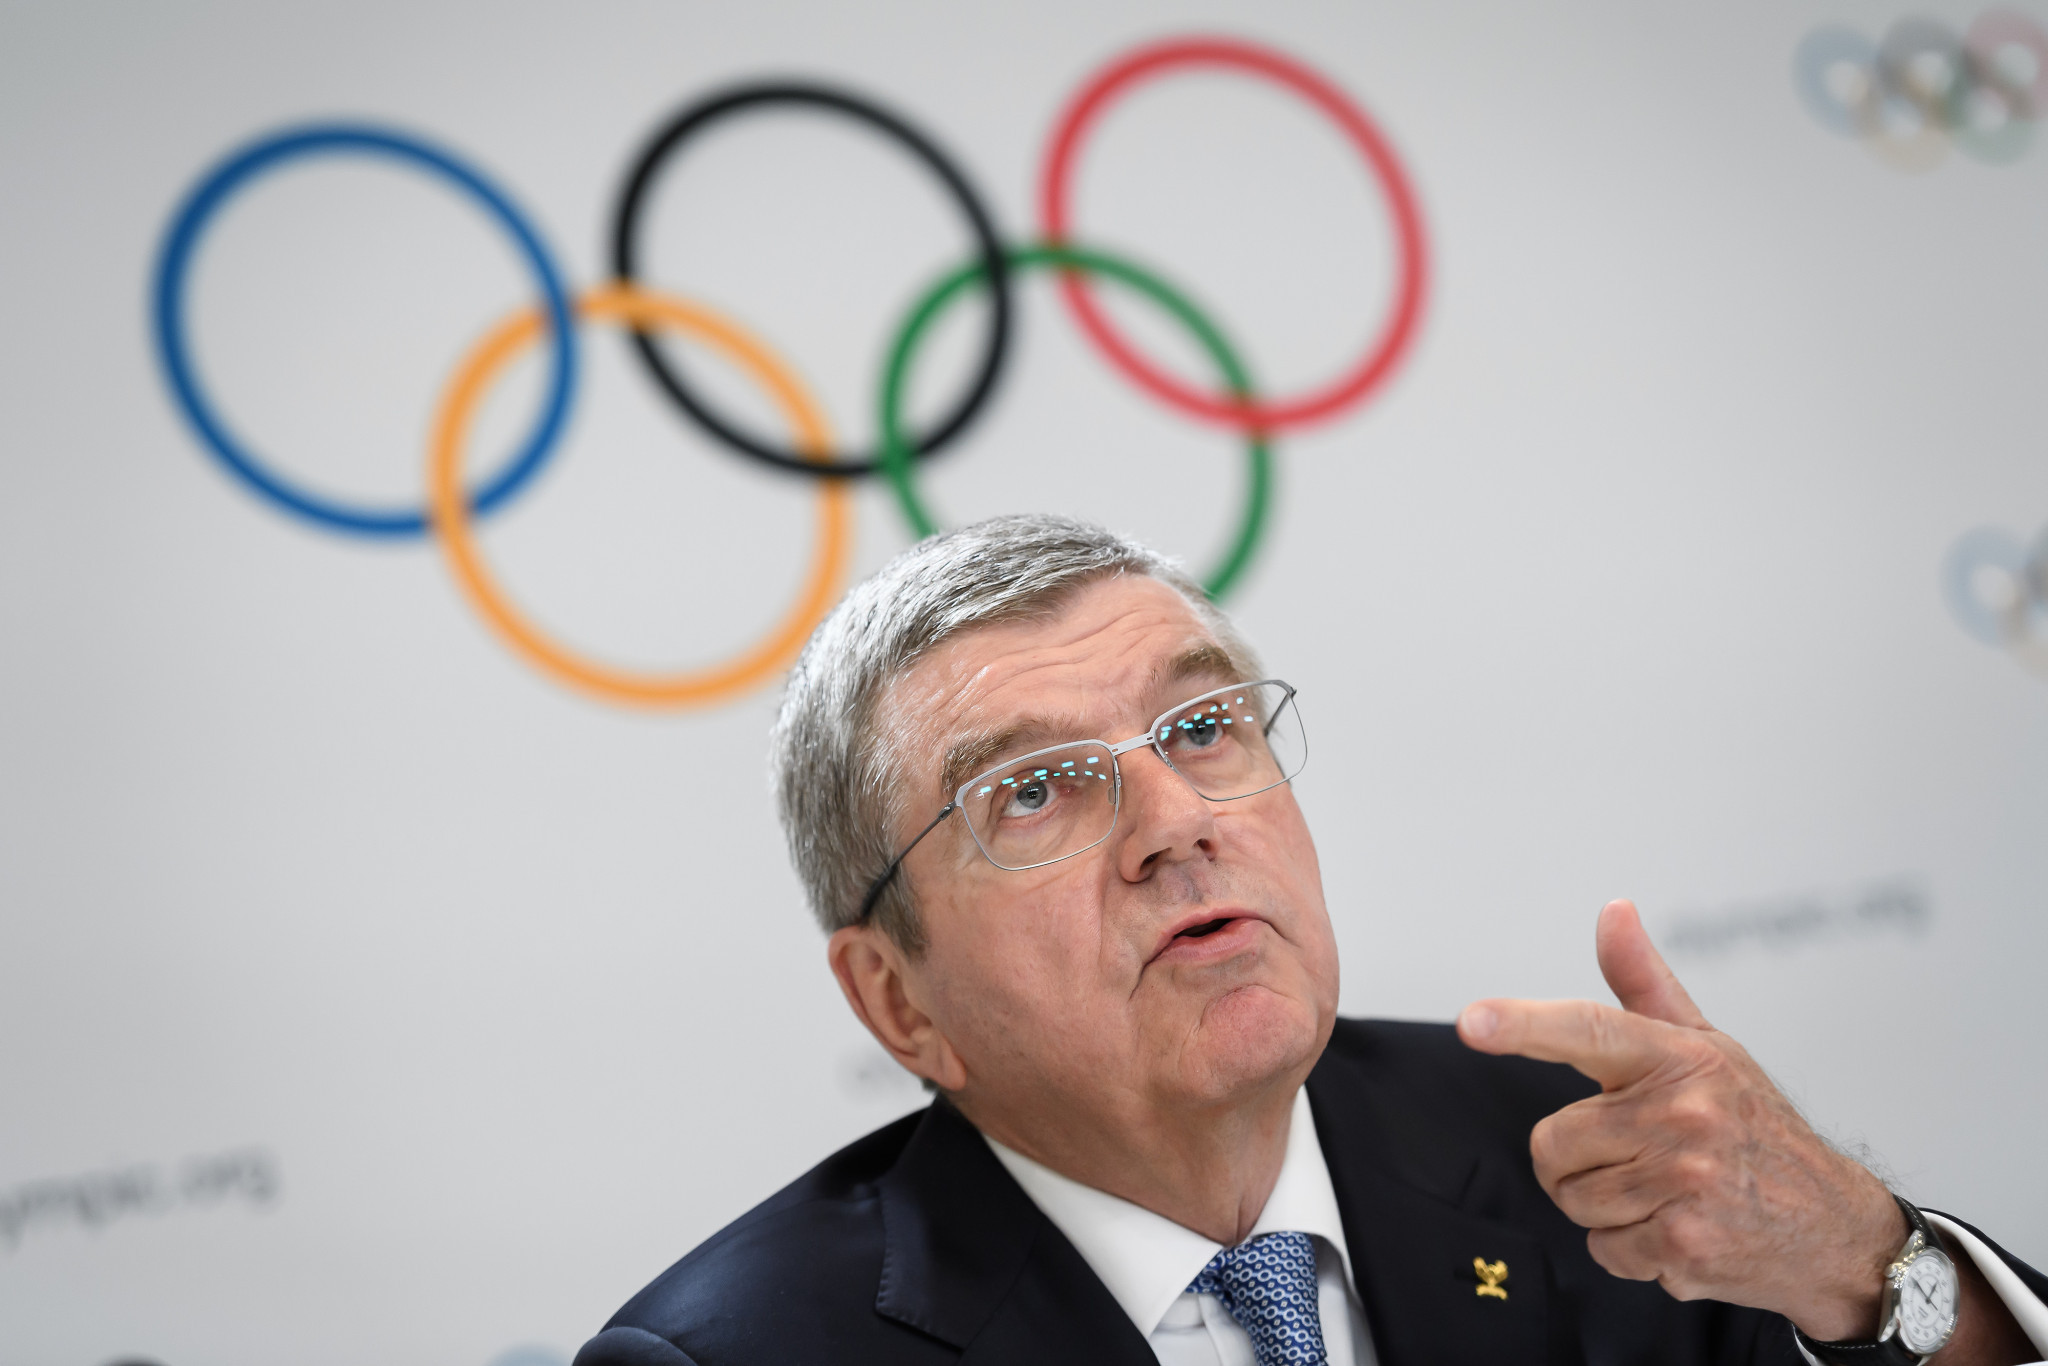 IOC President Thomas Bach has previously suggested climate change has led to a reduction on bids for the Winter Olympics ©Getty Images